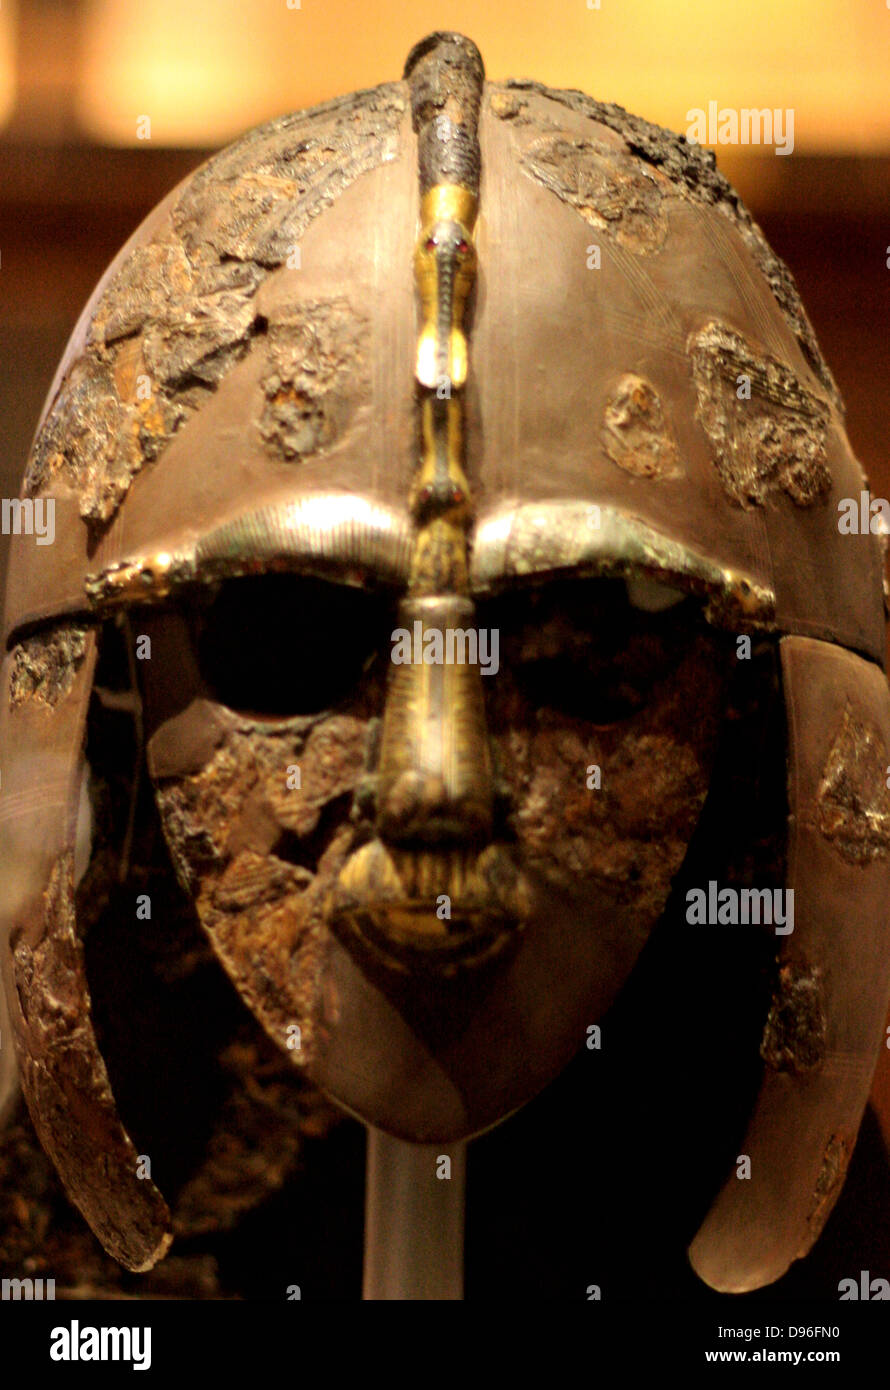 Sutton Hoo helmet. Early 7th century AD, England. One of only 4 early medieval helmets found in England. Made of Bronze, Silver wire and garnet. Features decorated panels depicting heroic scenes. Stock Photo